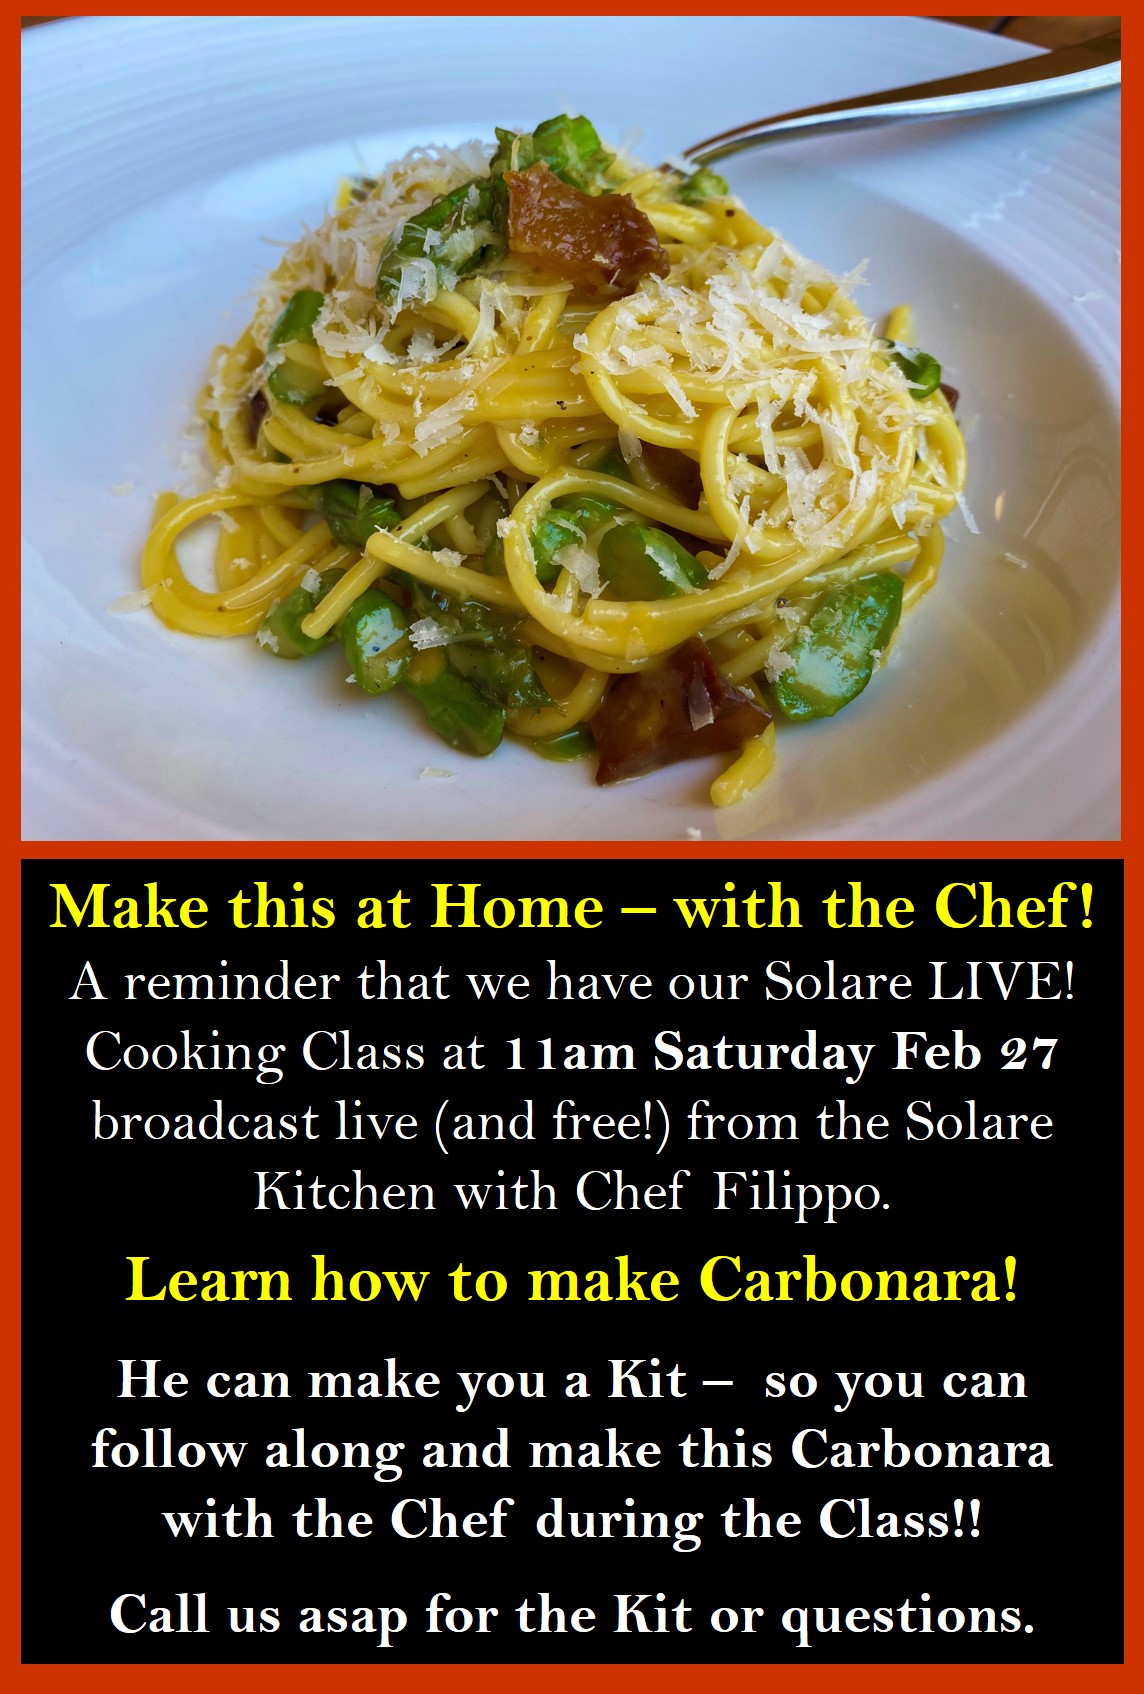 <a id="Solare-LIVE-Cooking-Class-Feb-27"></a>Solare LIVE! Cooking Class - Carbonara